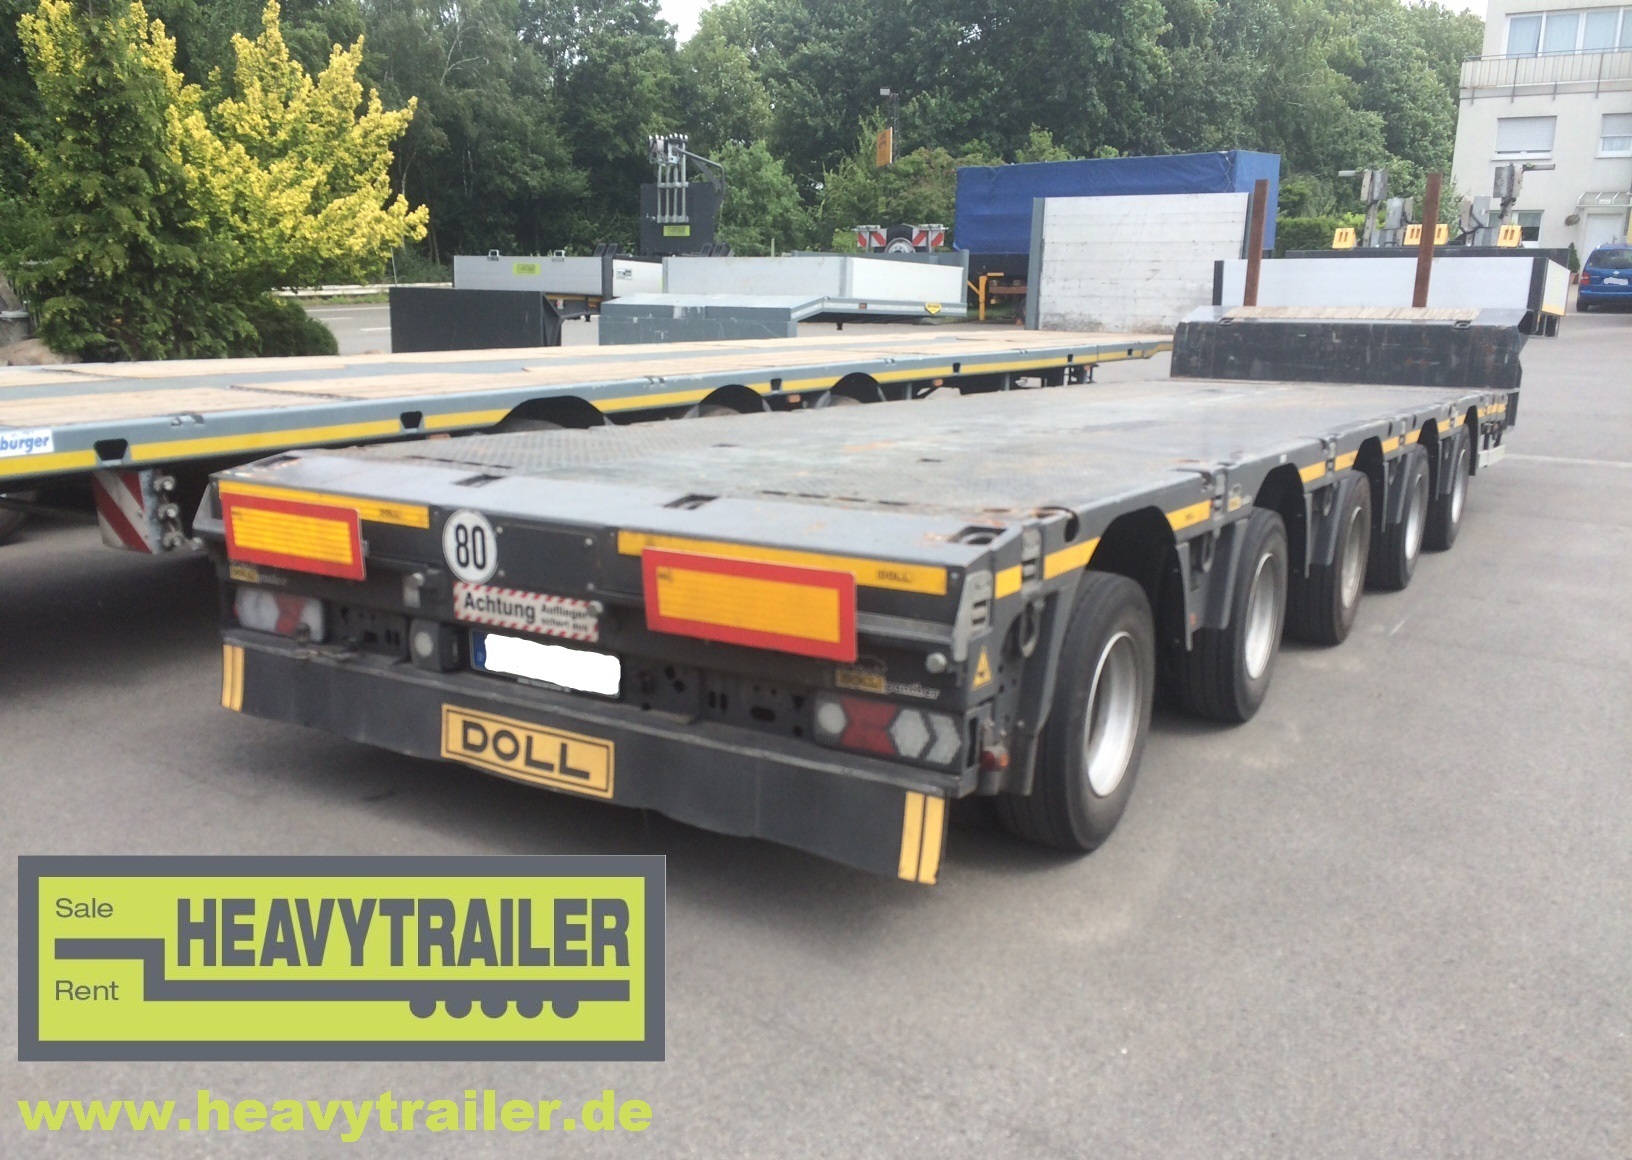 Doll 5-axle-semi-trailer with Panther-axle double telescopic